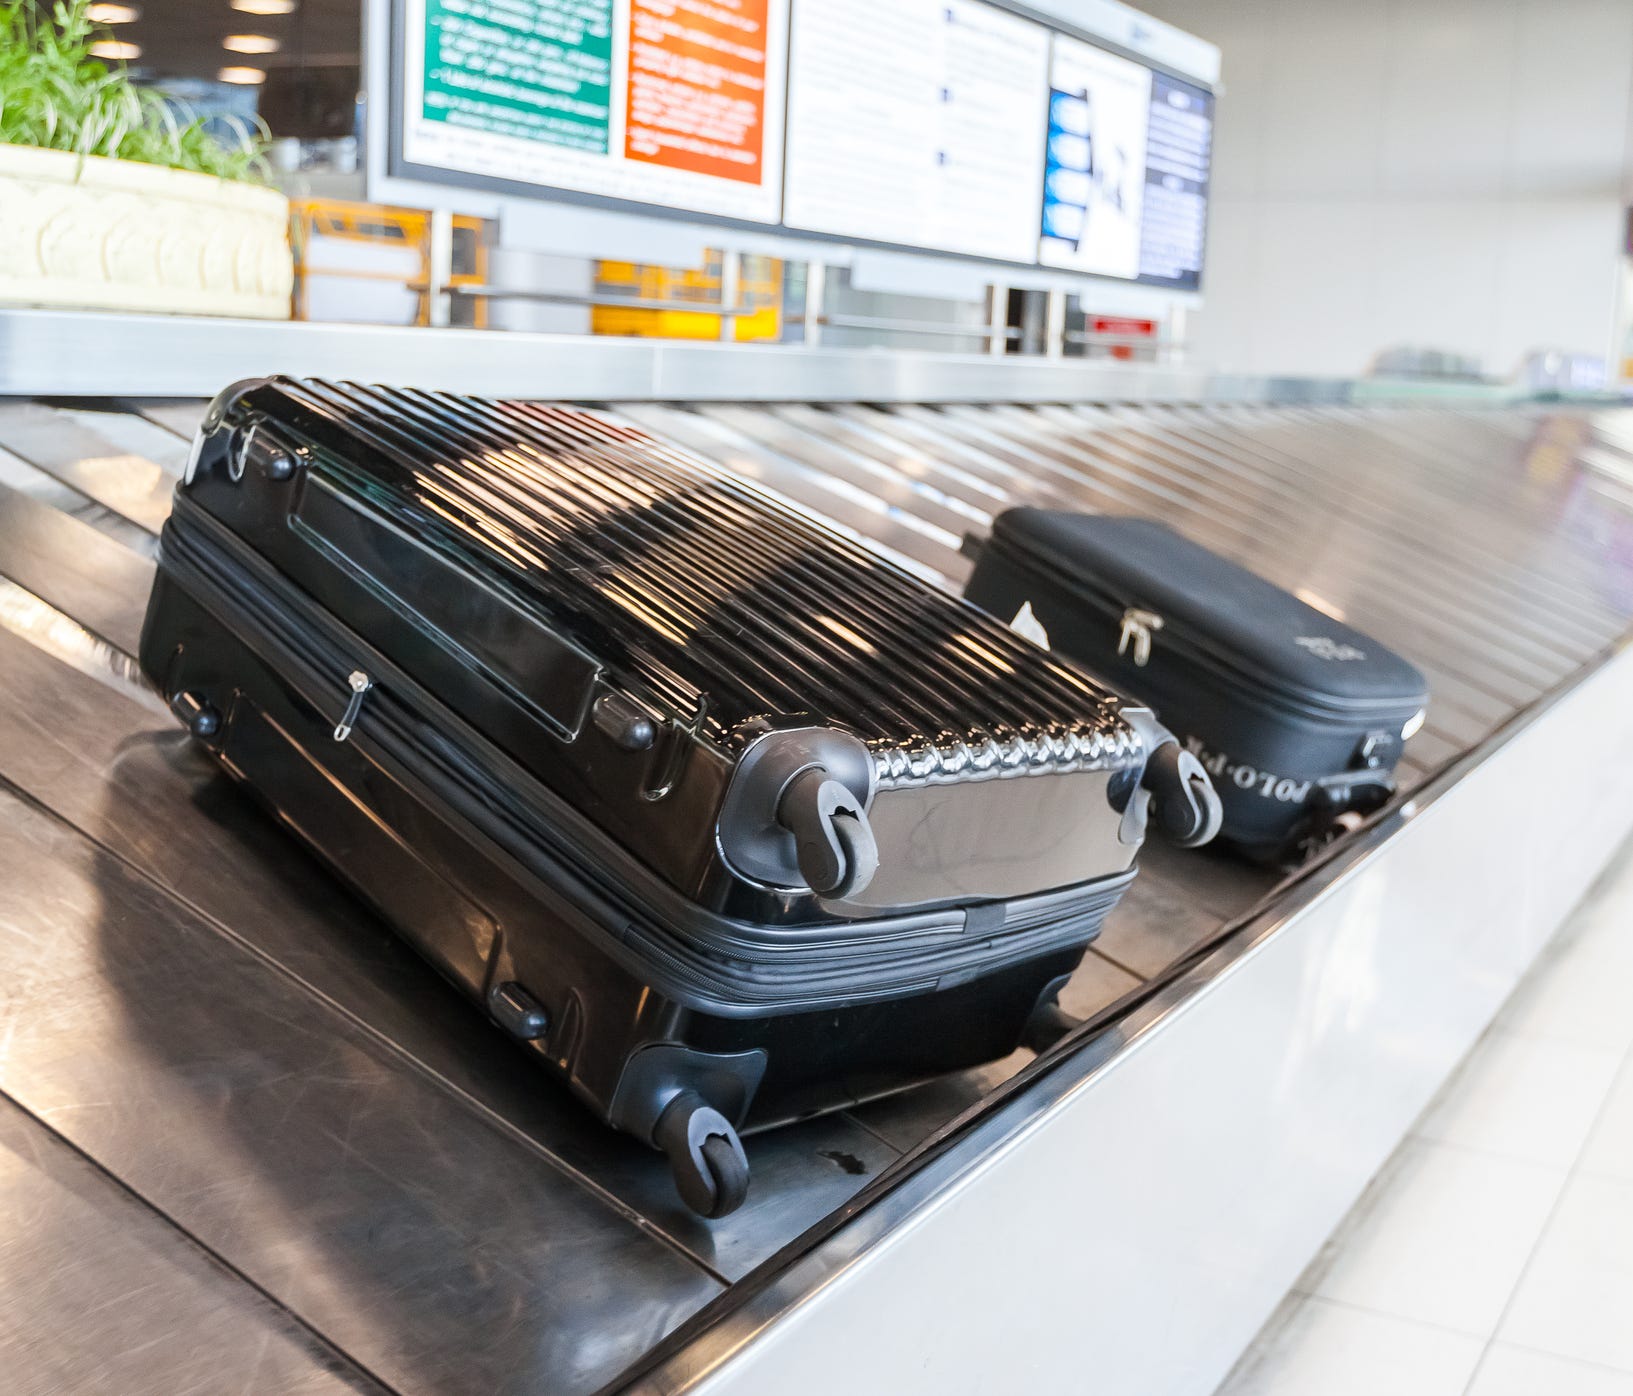 A four-wheeled rolling suitcase is less likely to get tossed around by airline baggage handlers.